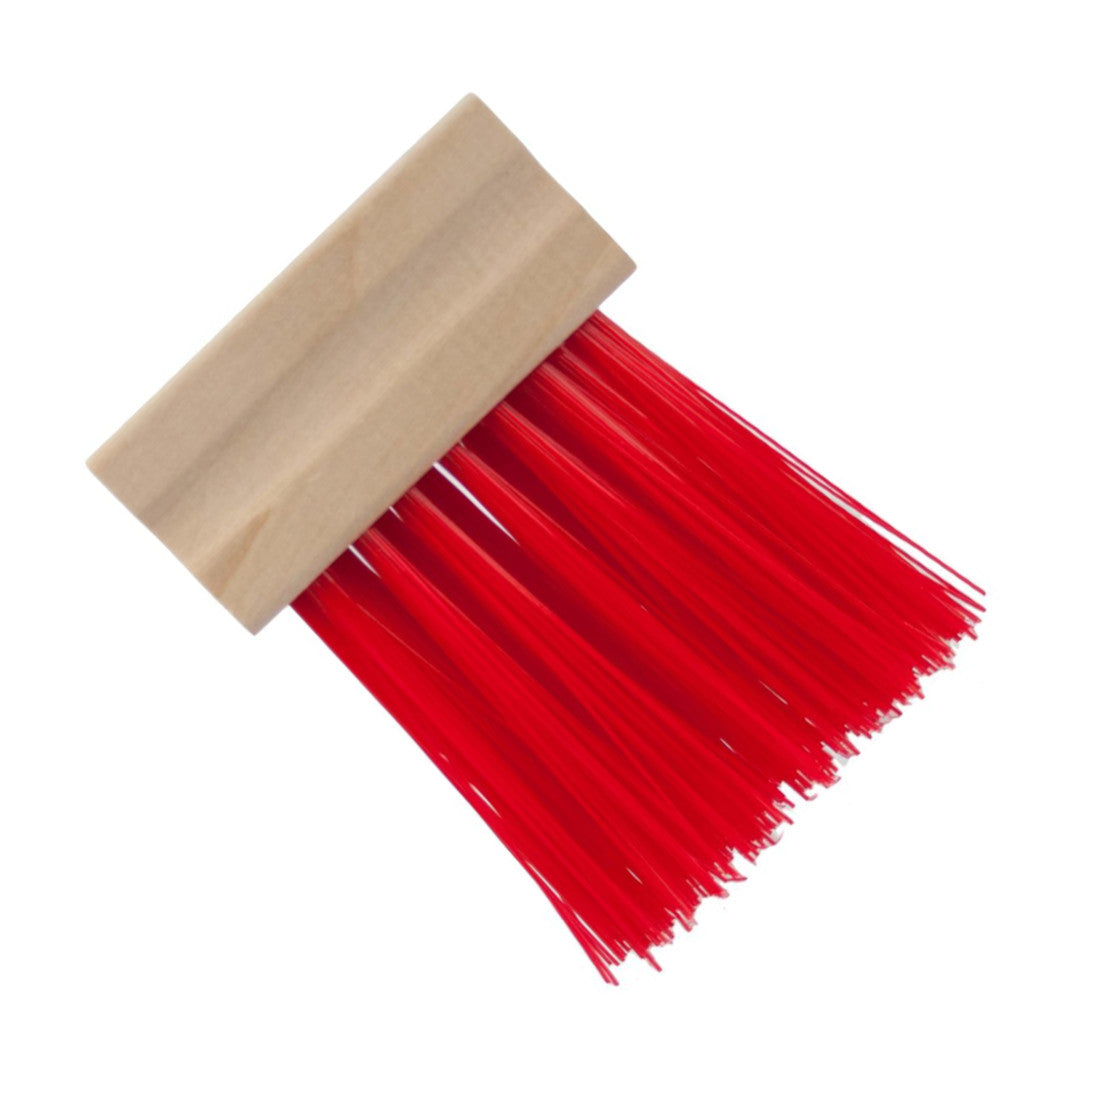 1pc Window Track Cleaning Brush